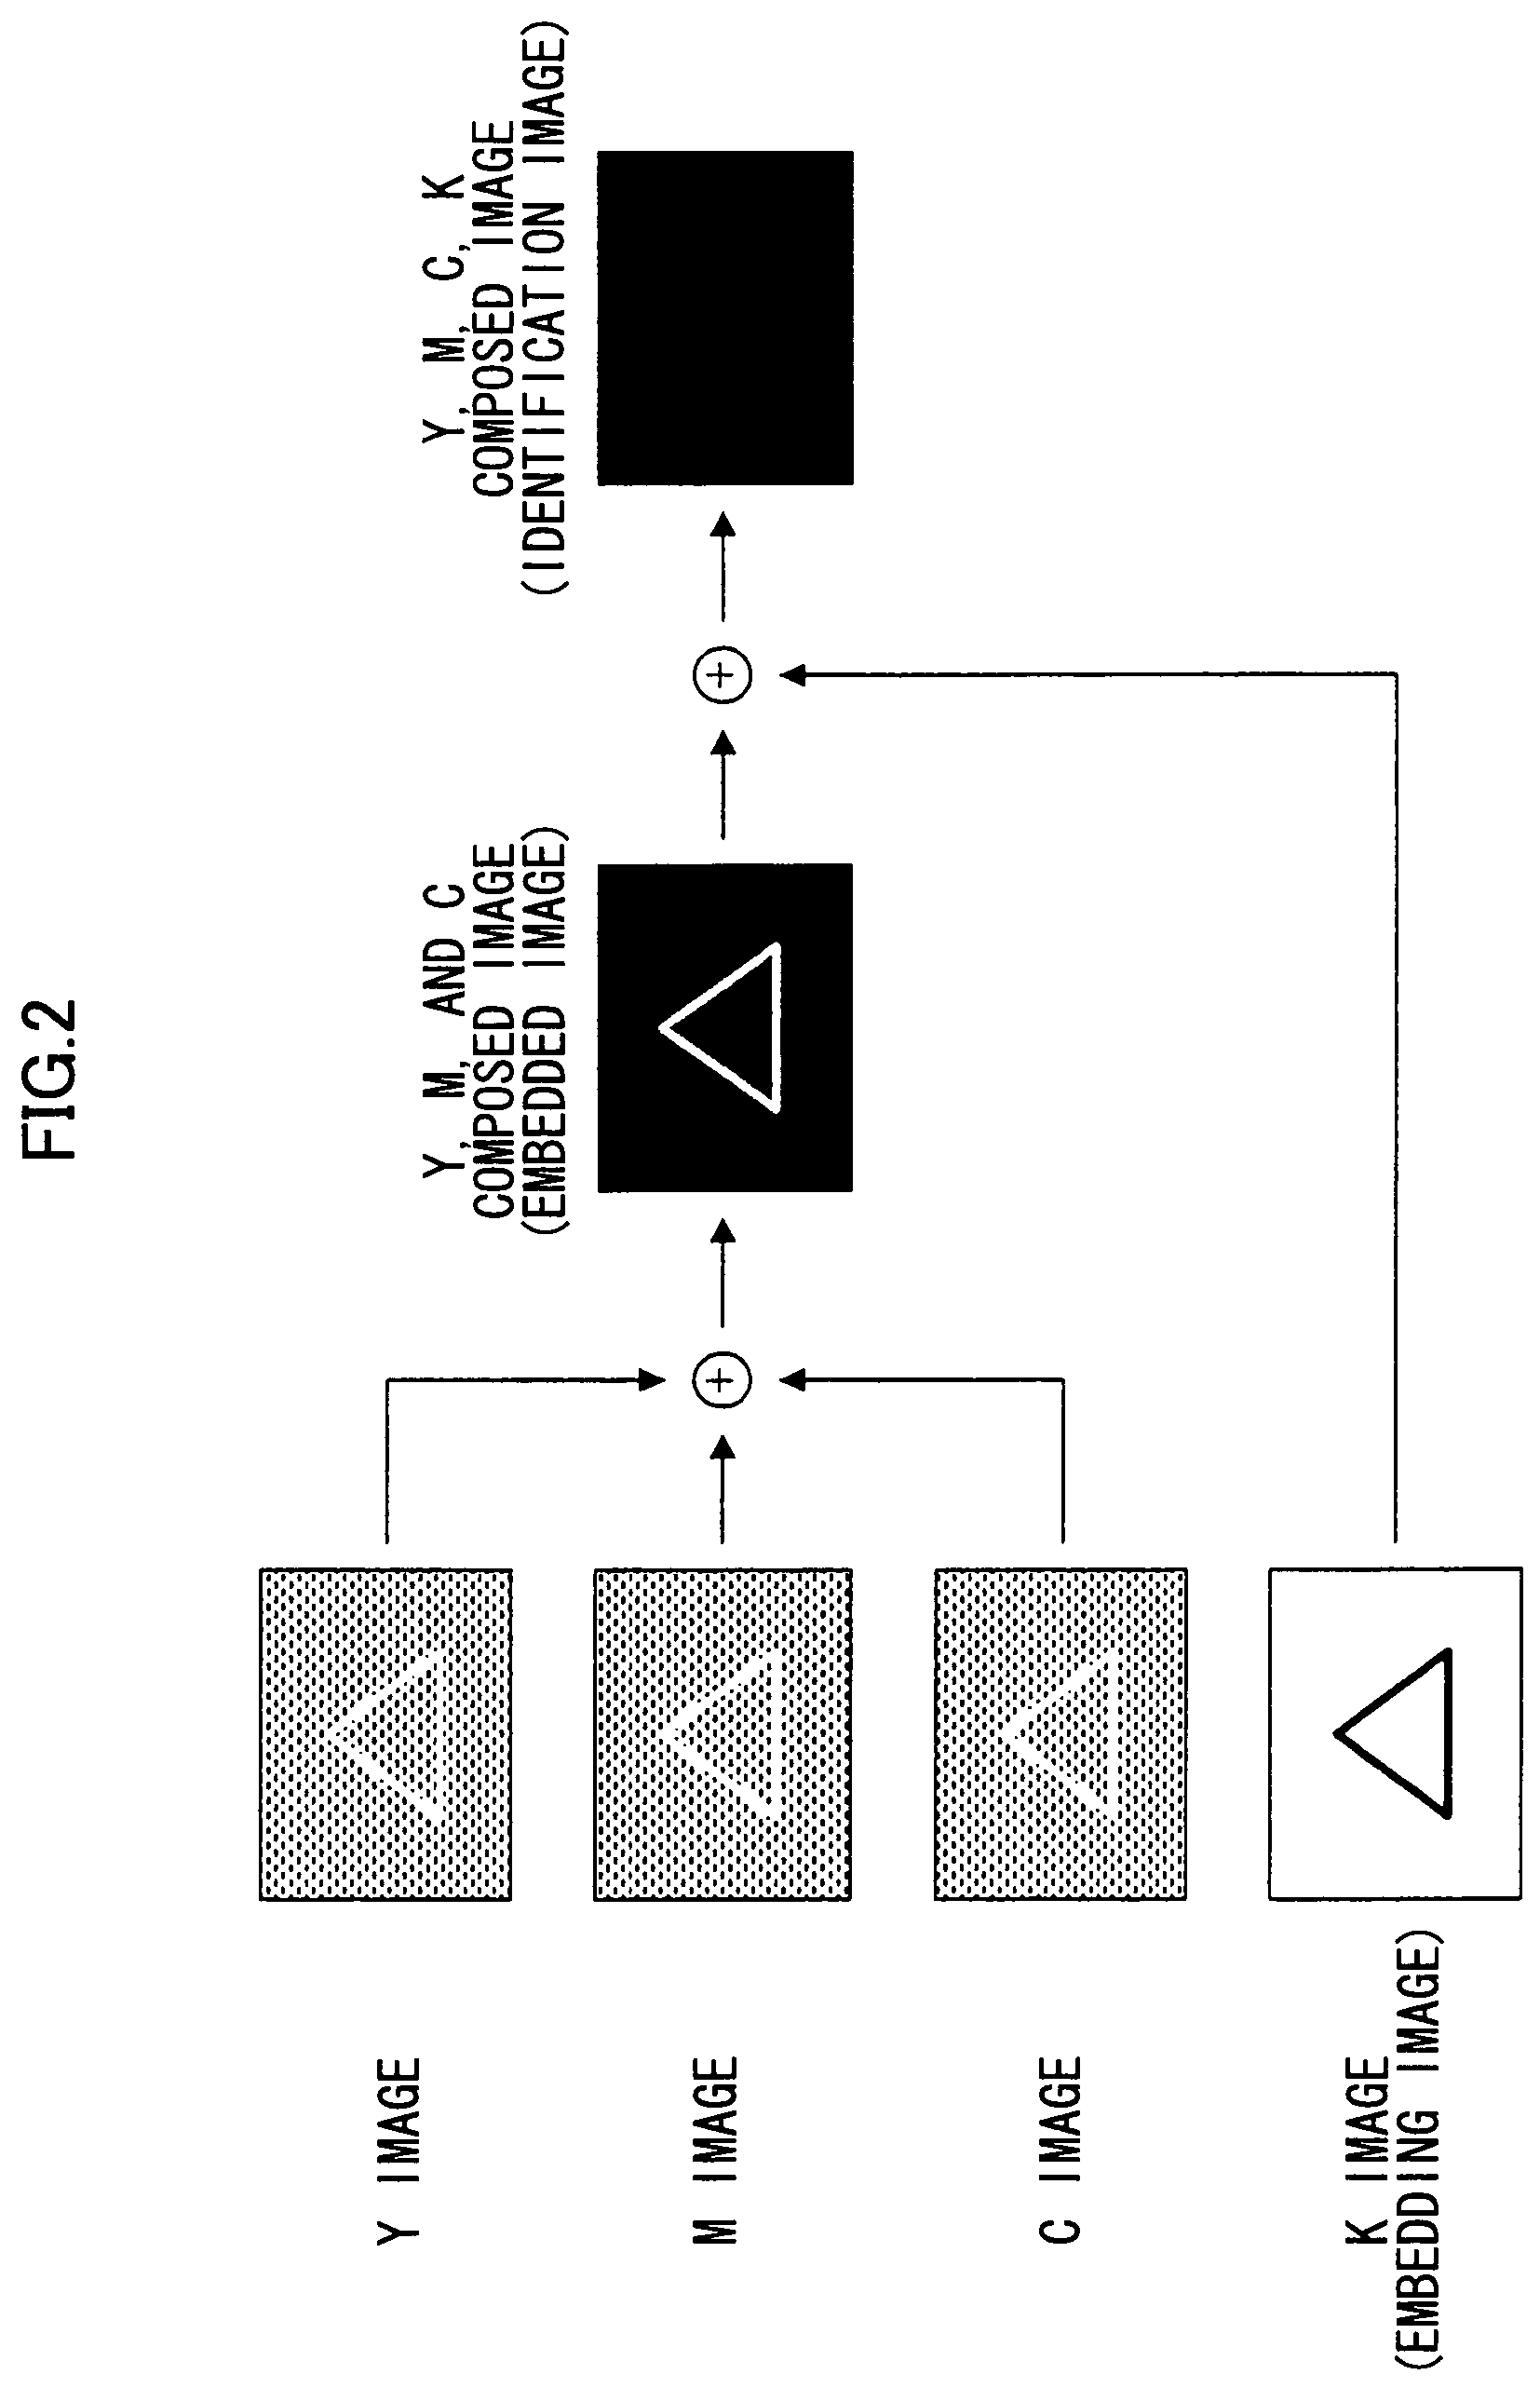 Print controlling apparatus, method, and storage medium for generating print image data of a particular color space representing a print object document in the form of a plurality of color components